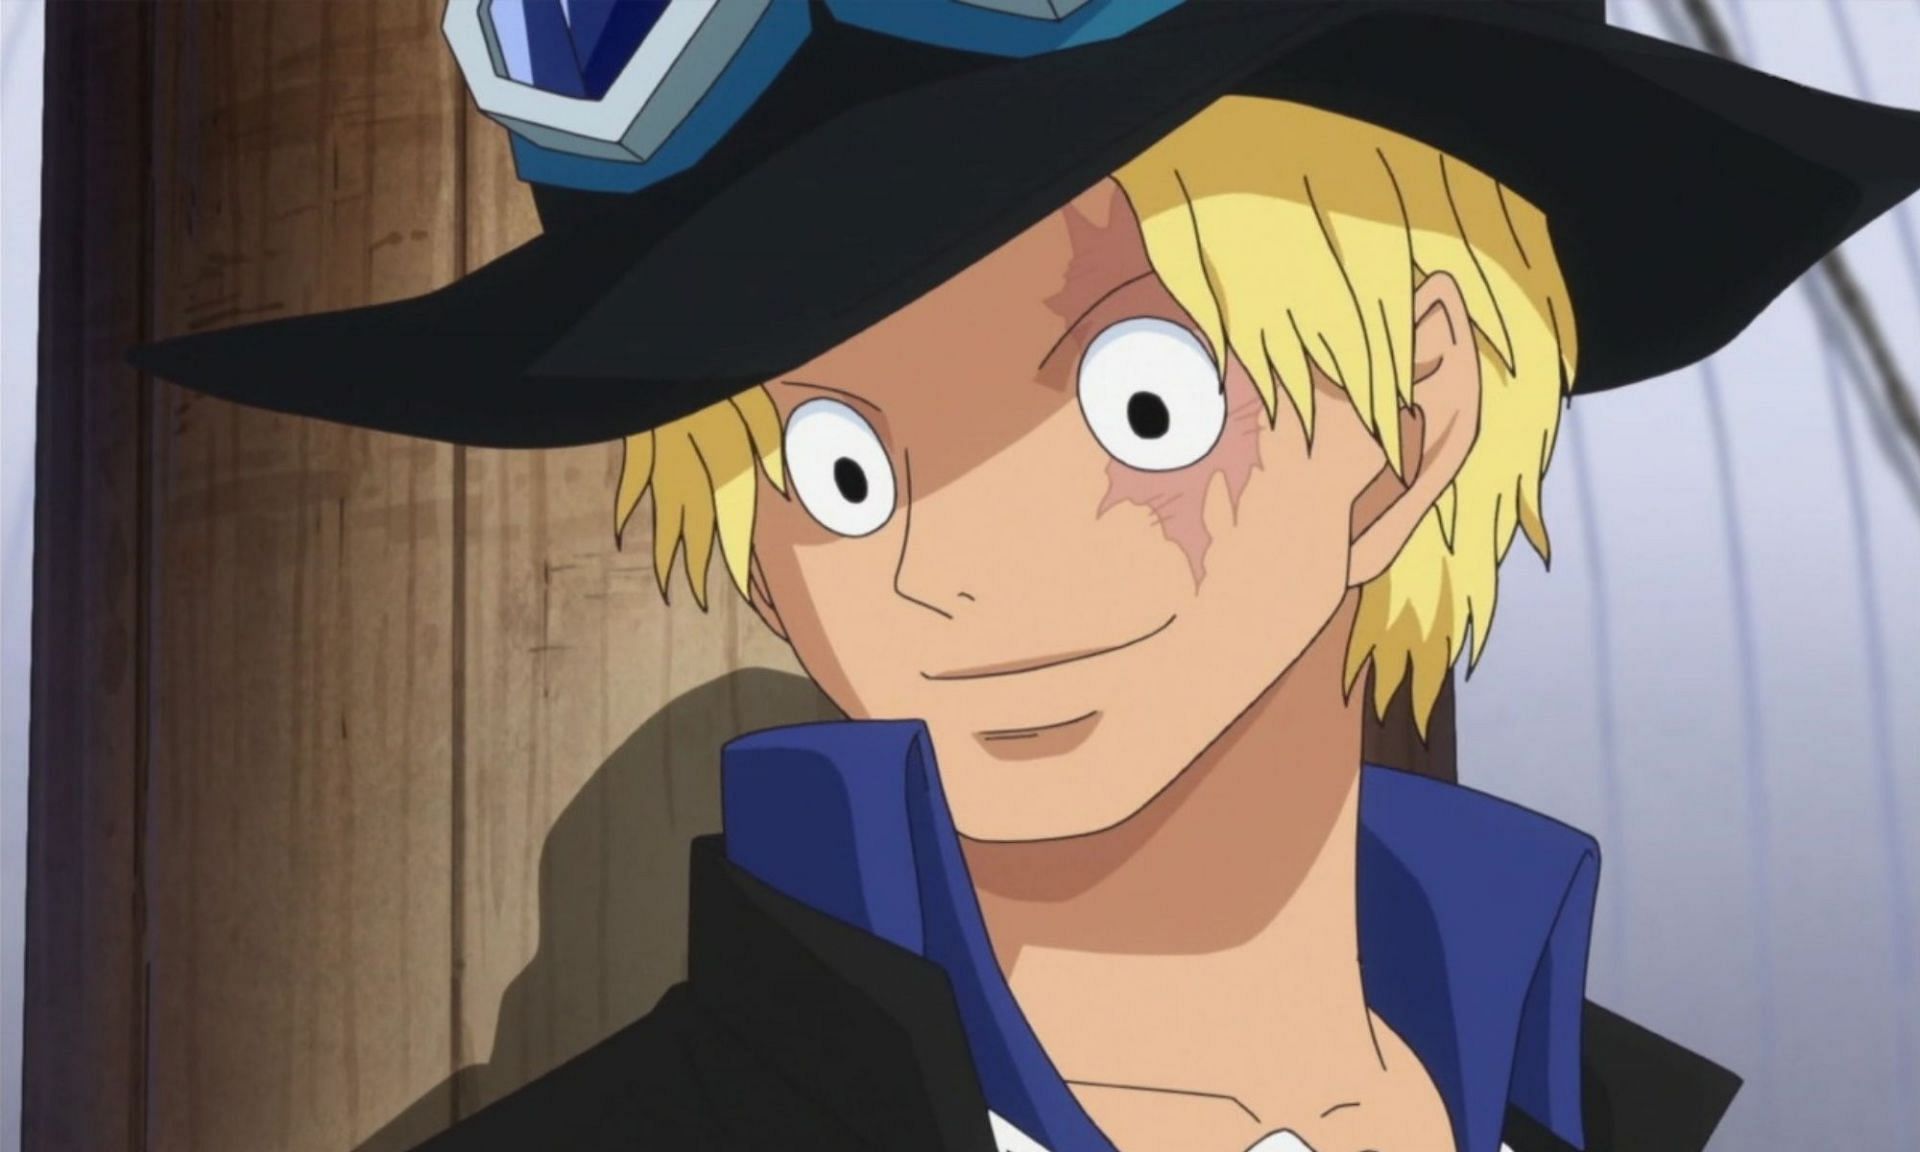 Sabo is still on the run from the World Government